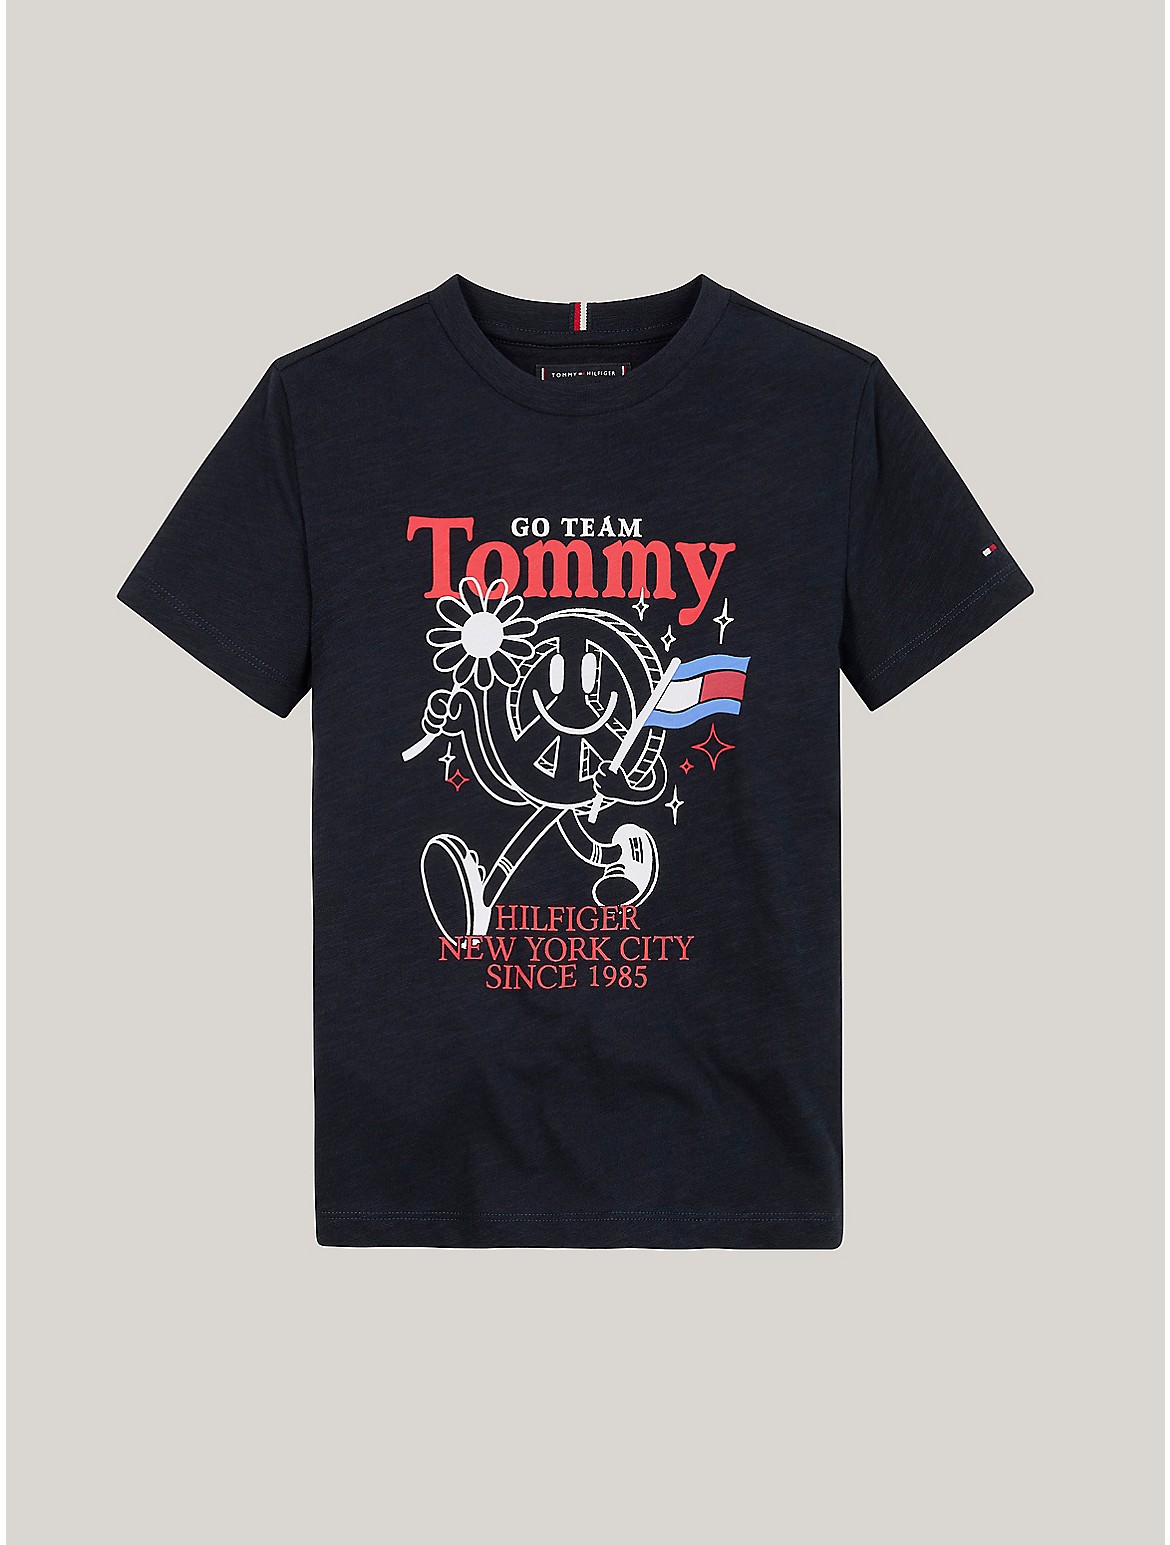 Tommy Hilfiger Boys' Kids' On-The-Go Graphic T-Shirt